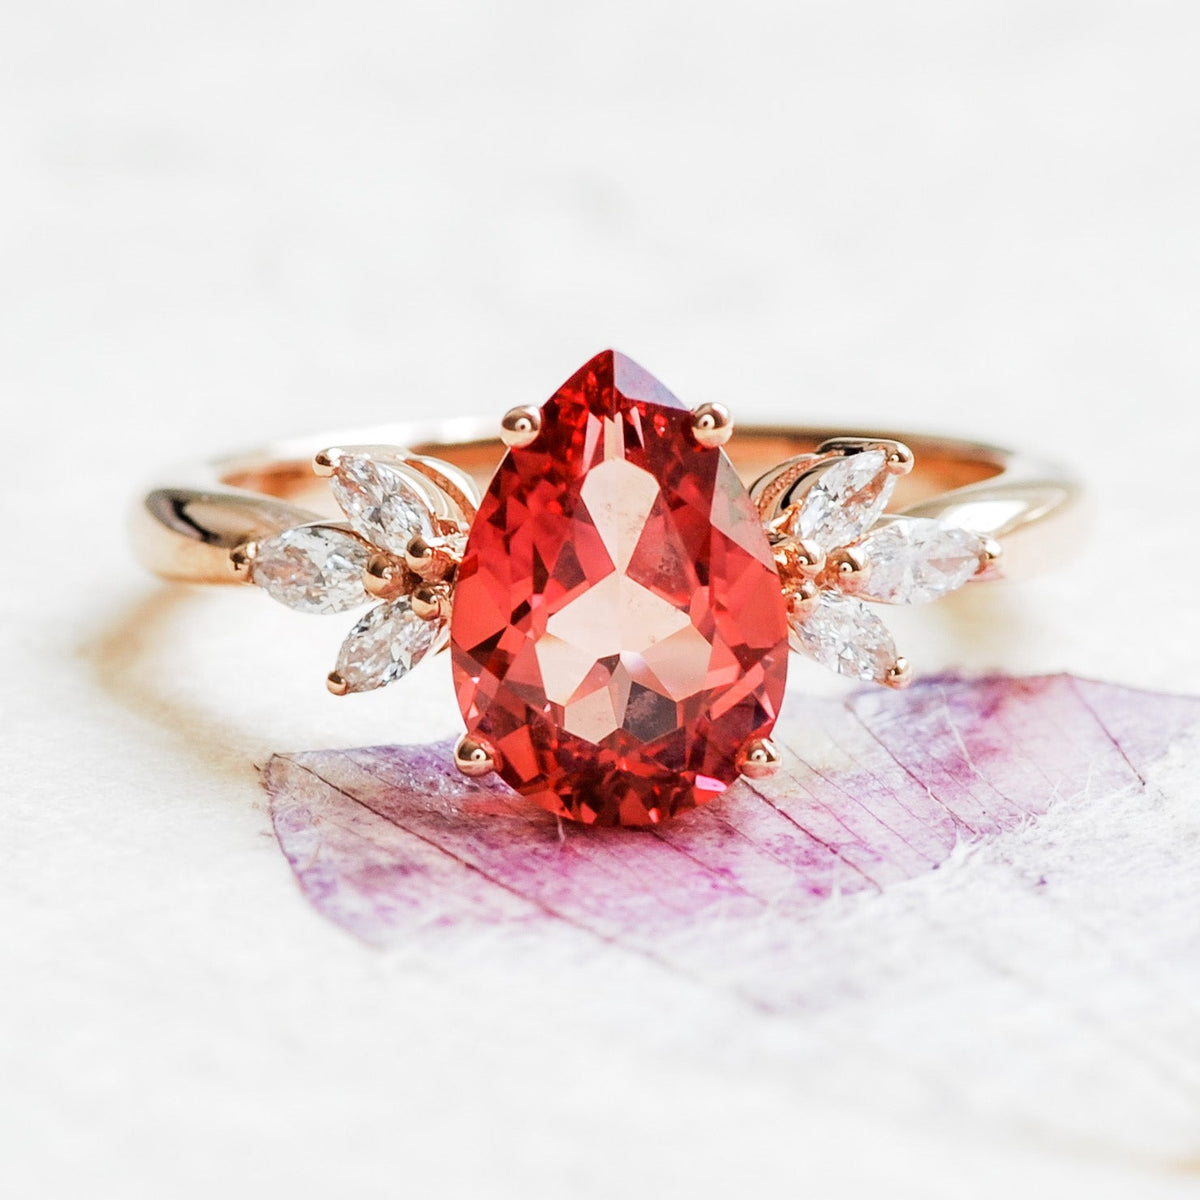 The Best Pink Engagement Rings - Padparadscha Sapphire, Pink Diamond, and  Pink Sapphire Engagement Rings